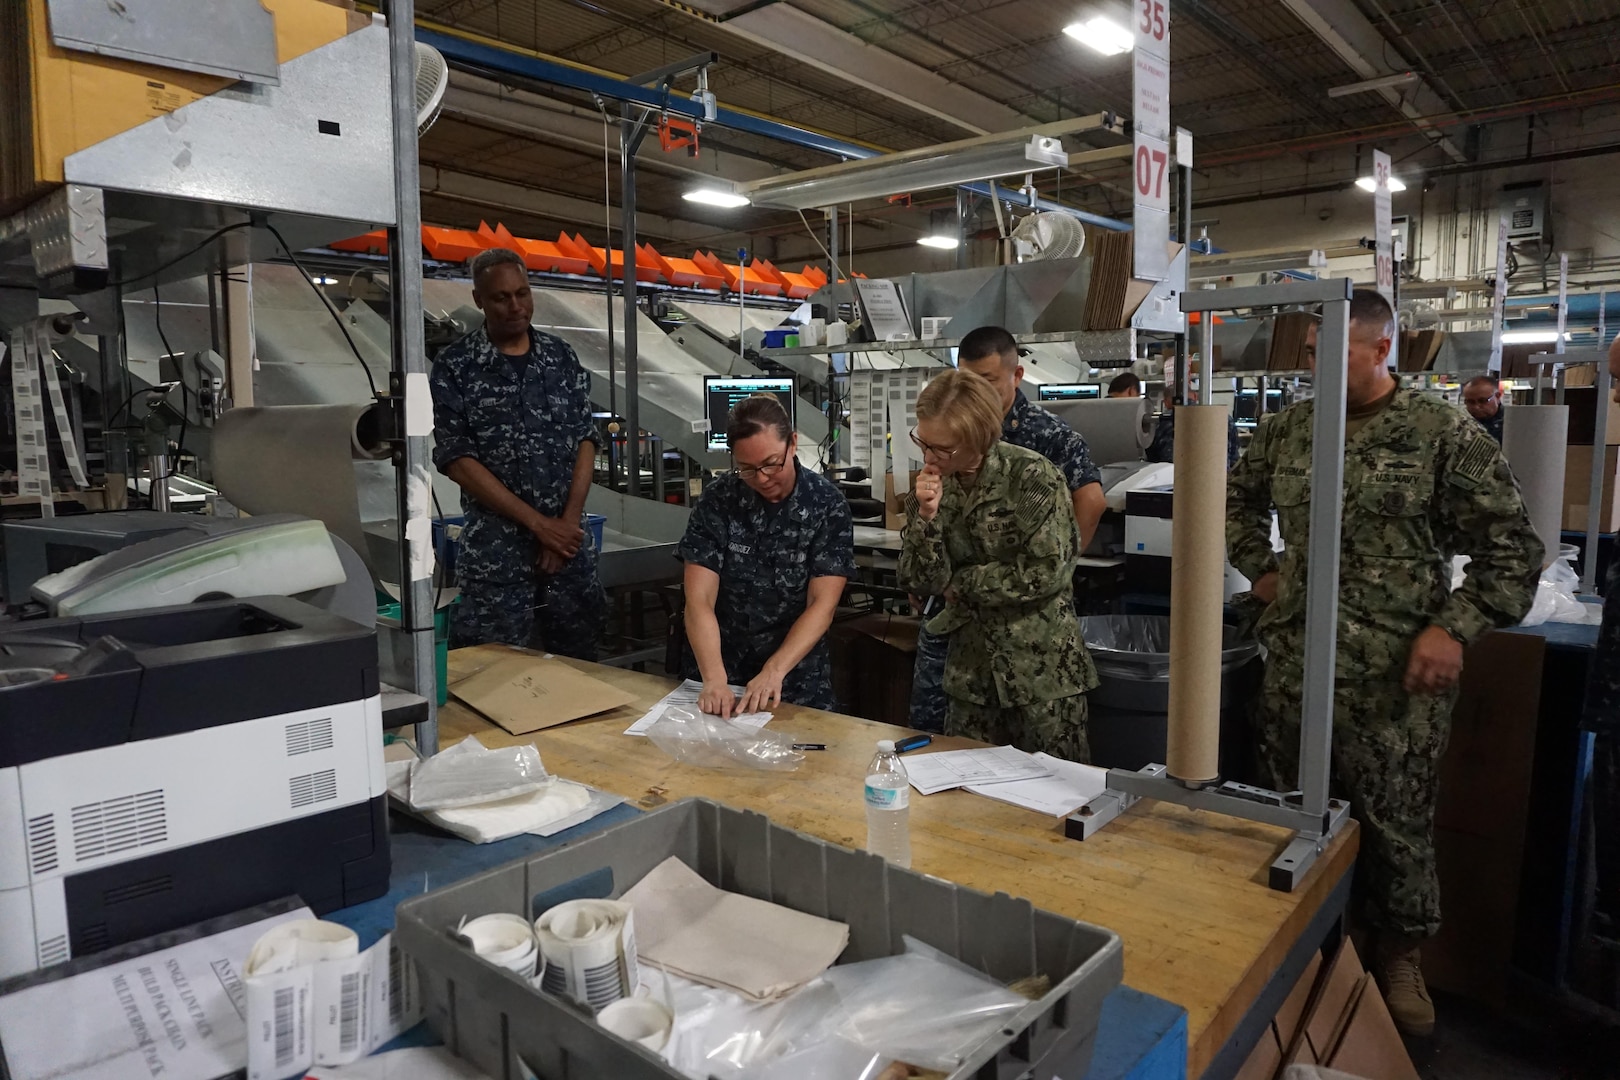 A group of people gathered around a worktable in a distribution warehouse observe someone using a shipping label and other shipping supplies in a demonstration.